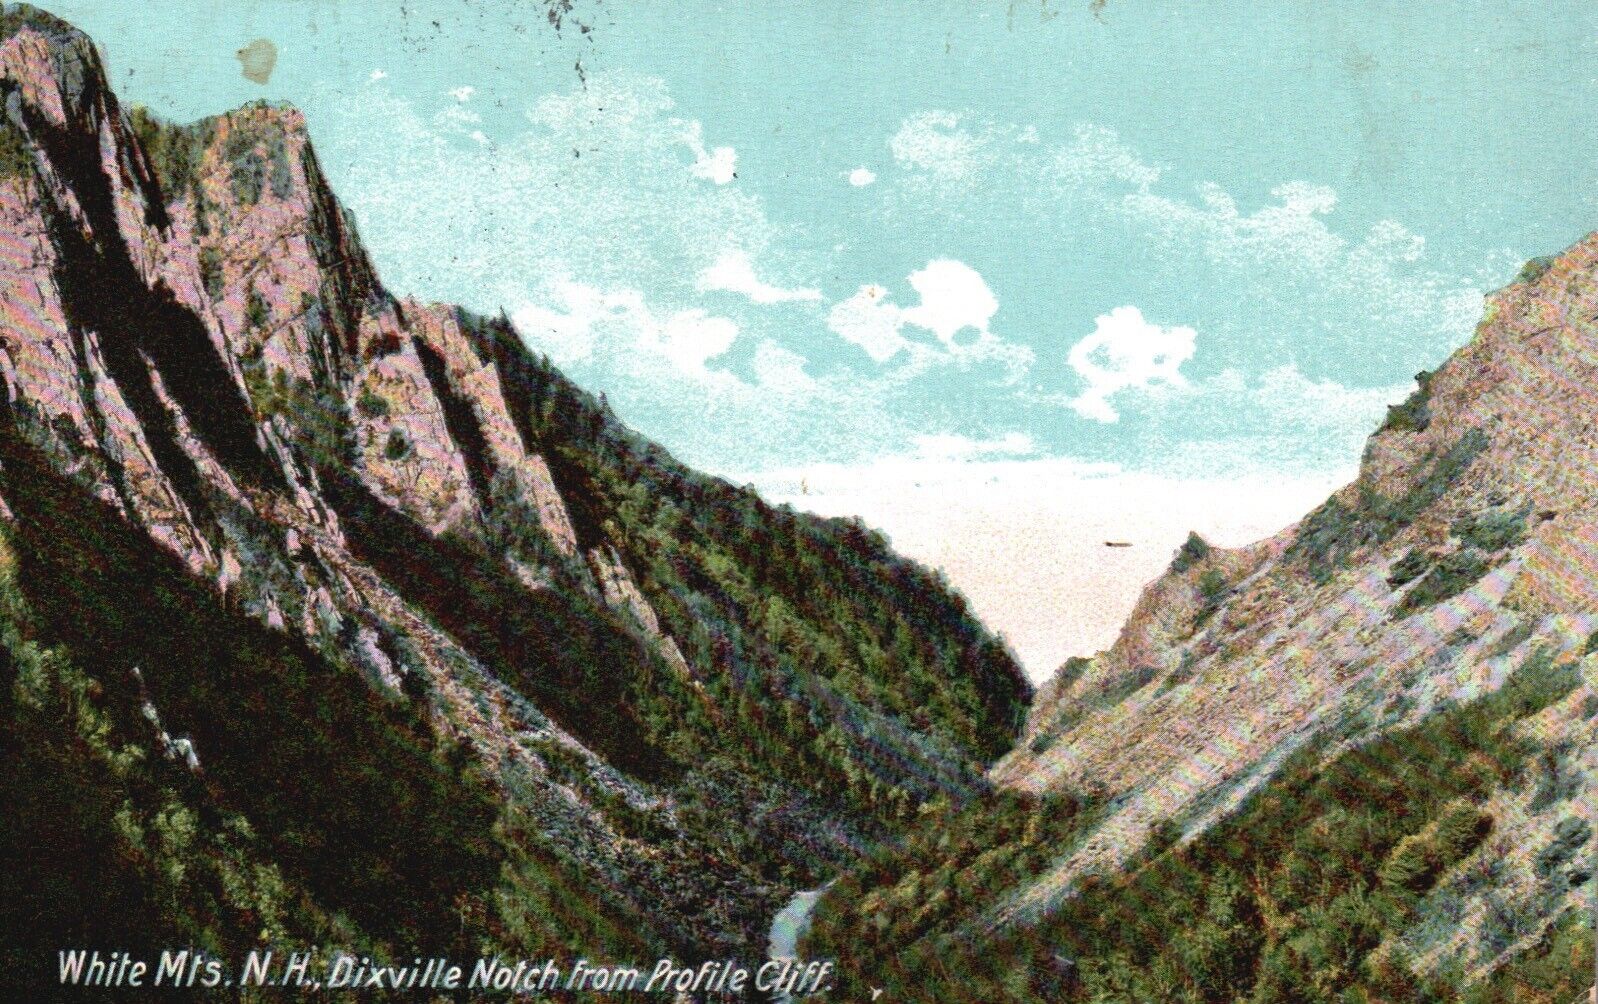 Postcard NH White Mts Dixville Notch from Profile Cliff 1918 Vintage PC f611